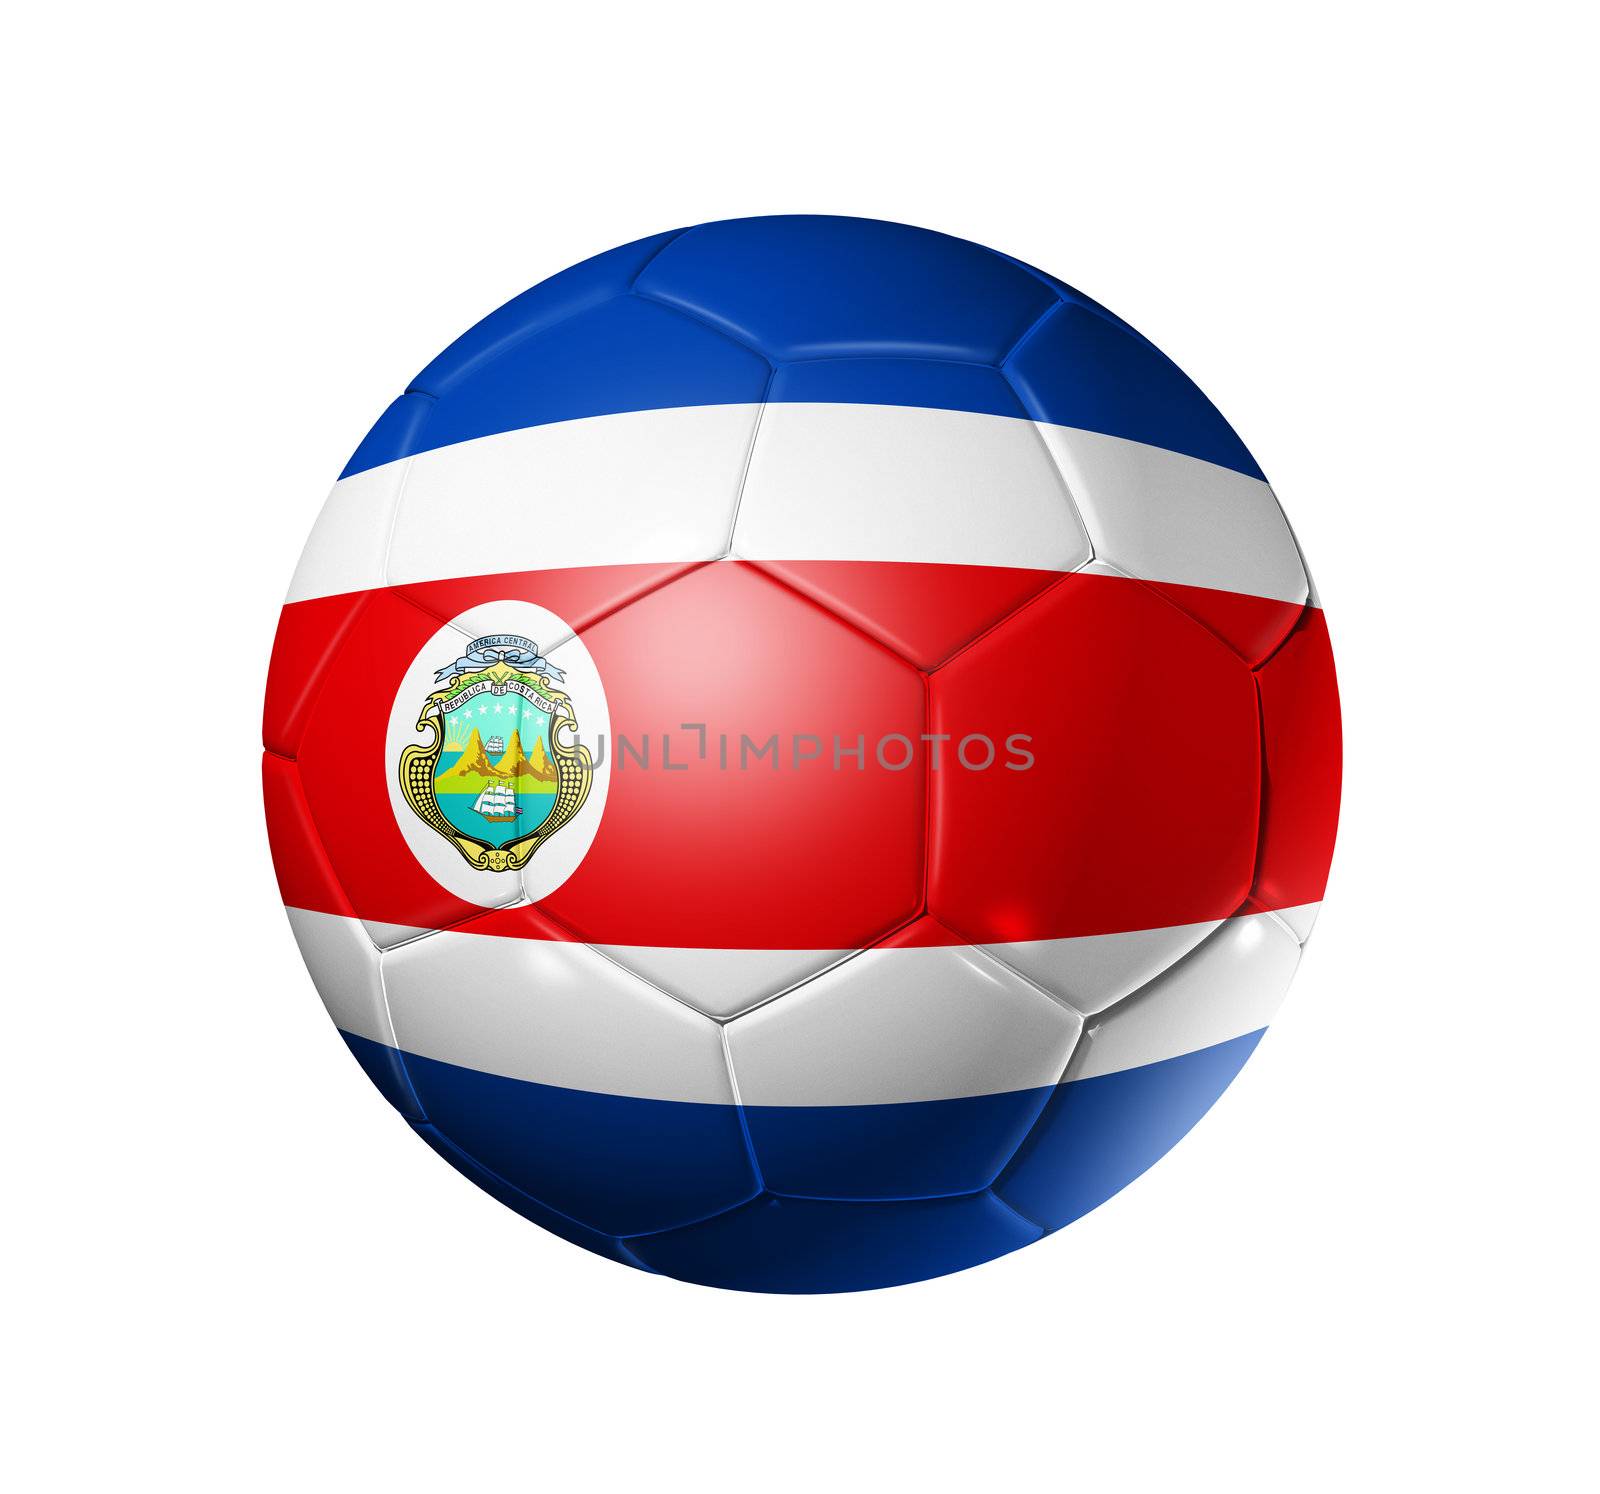 3D soccer ball with Costa Rica team flag. isolated on white with clipping path